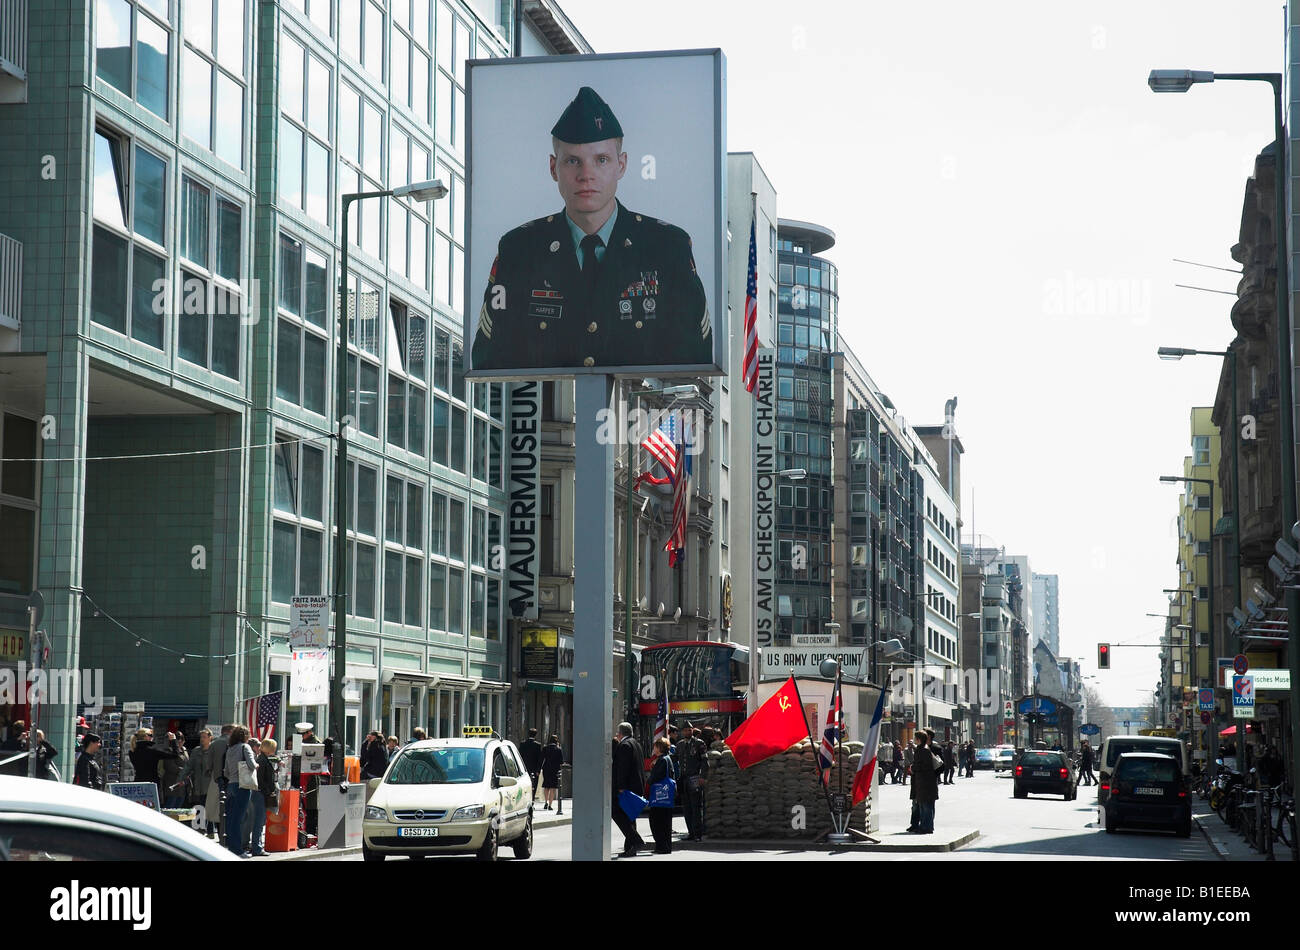 American soldier displayed at Checkpoint Charlie Berlin Germany April 2008 Stock Photo